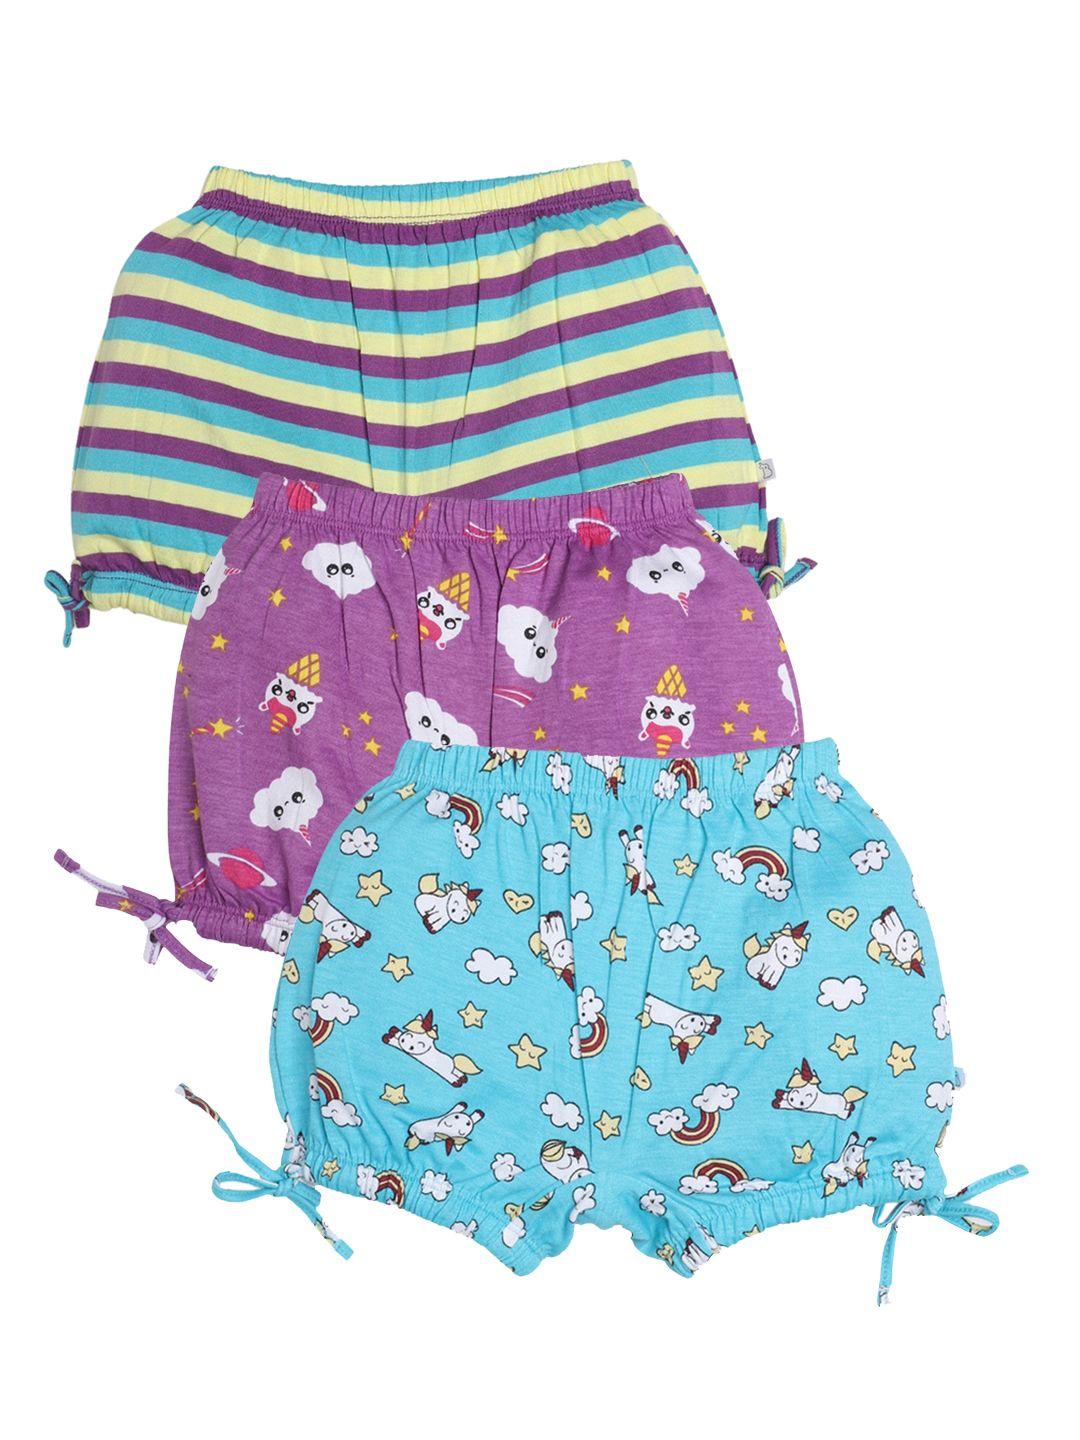 superbottoms kids pack of 3 assorted sustainable basic briefs und-u-bl-ud-2_3-3pack-unicorn dreams